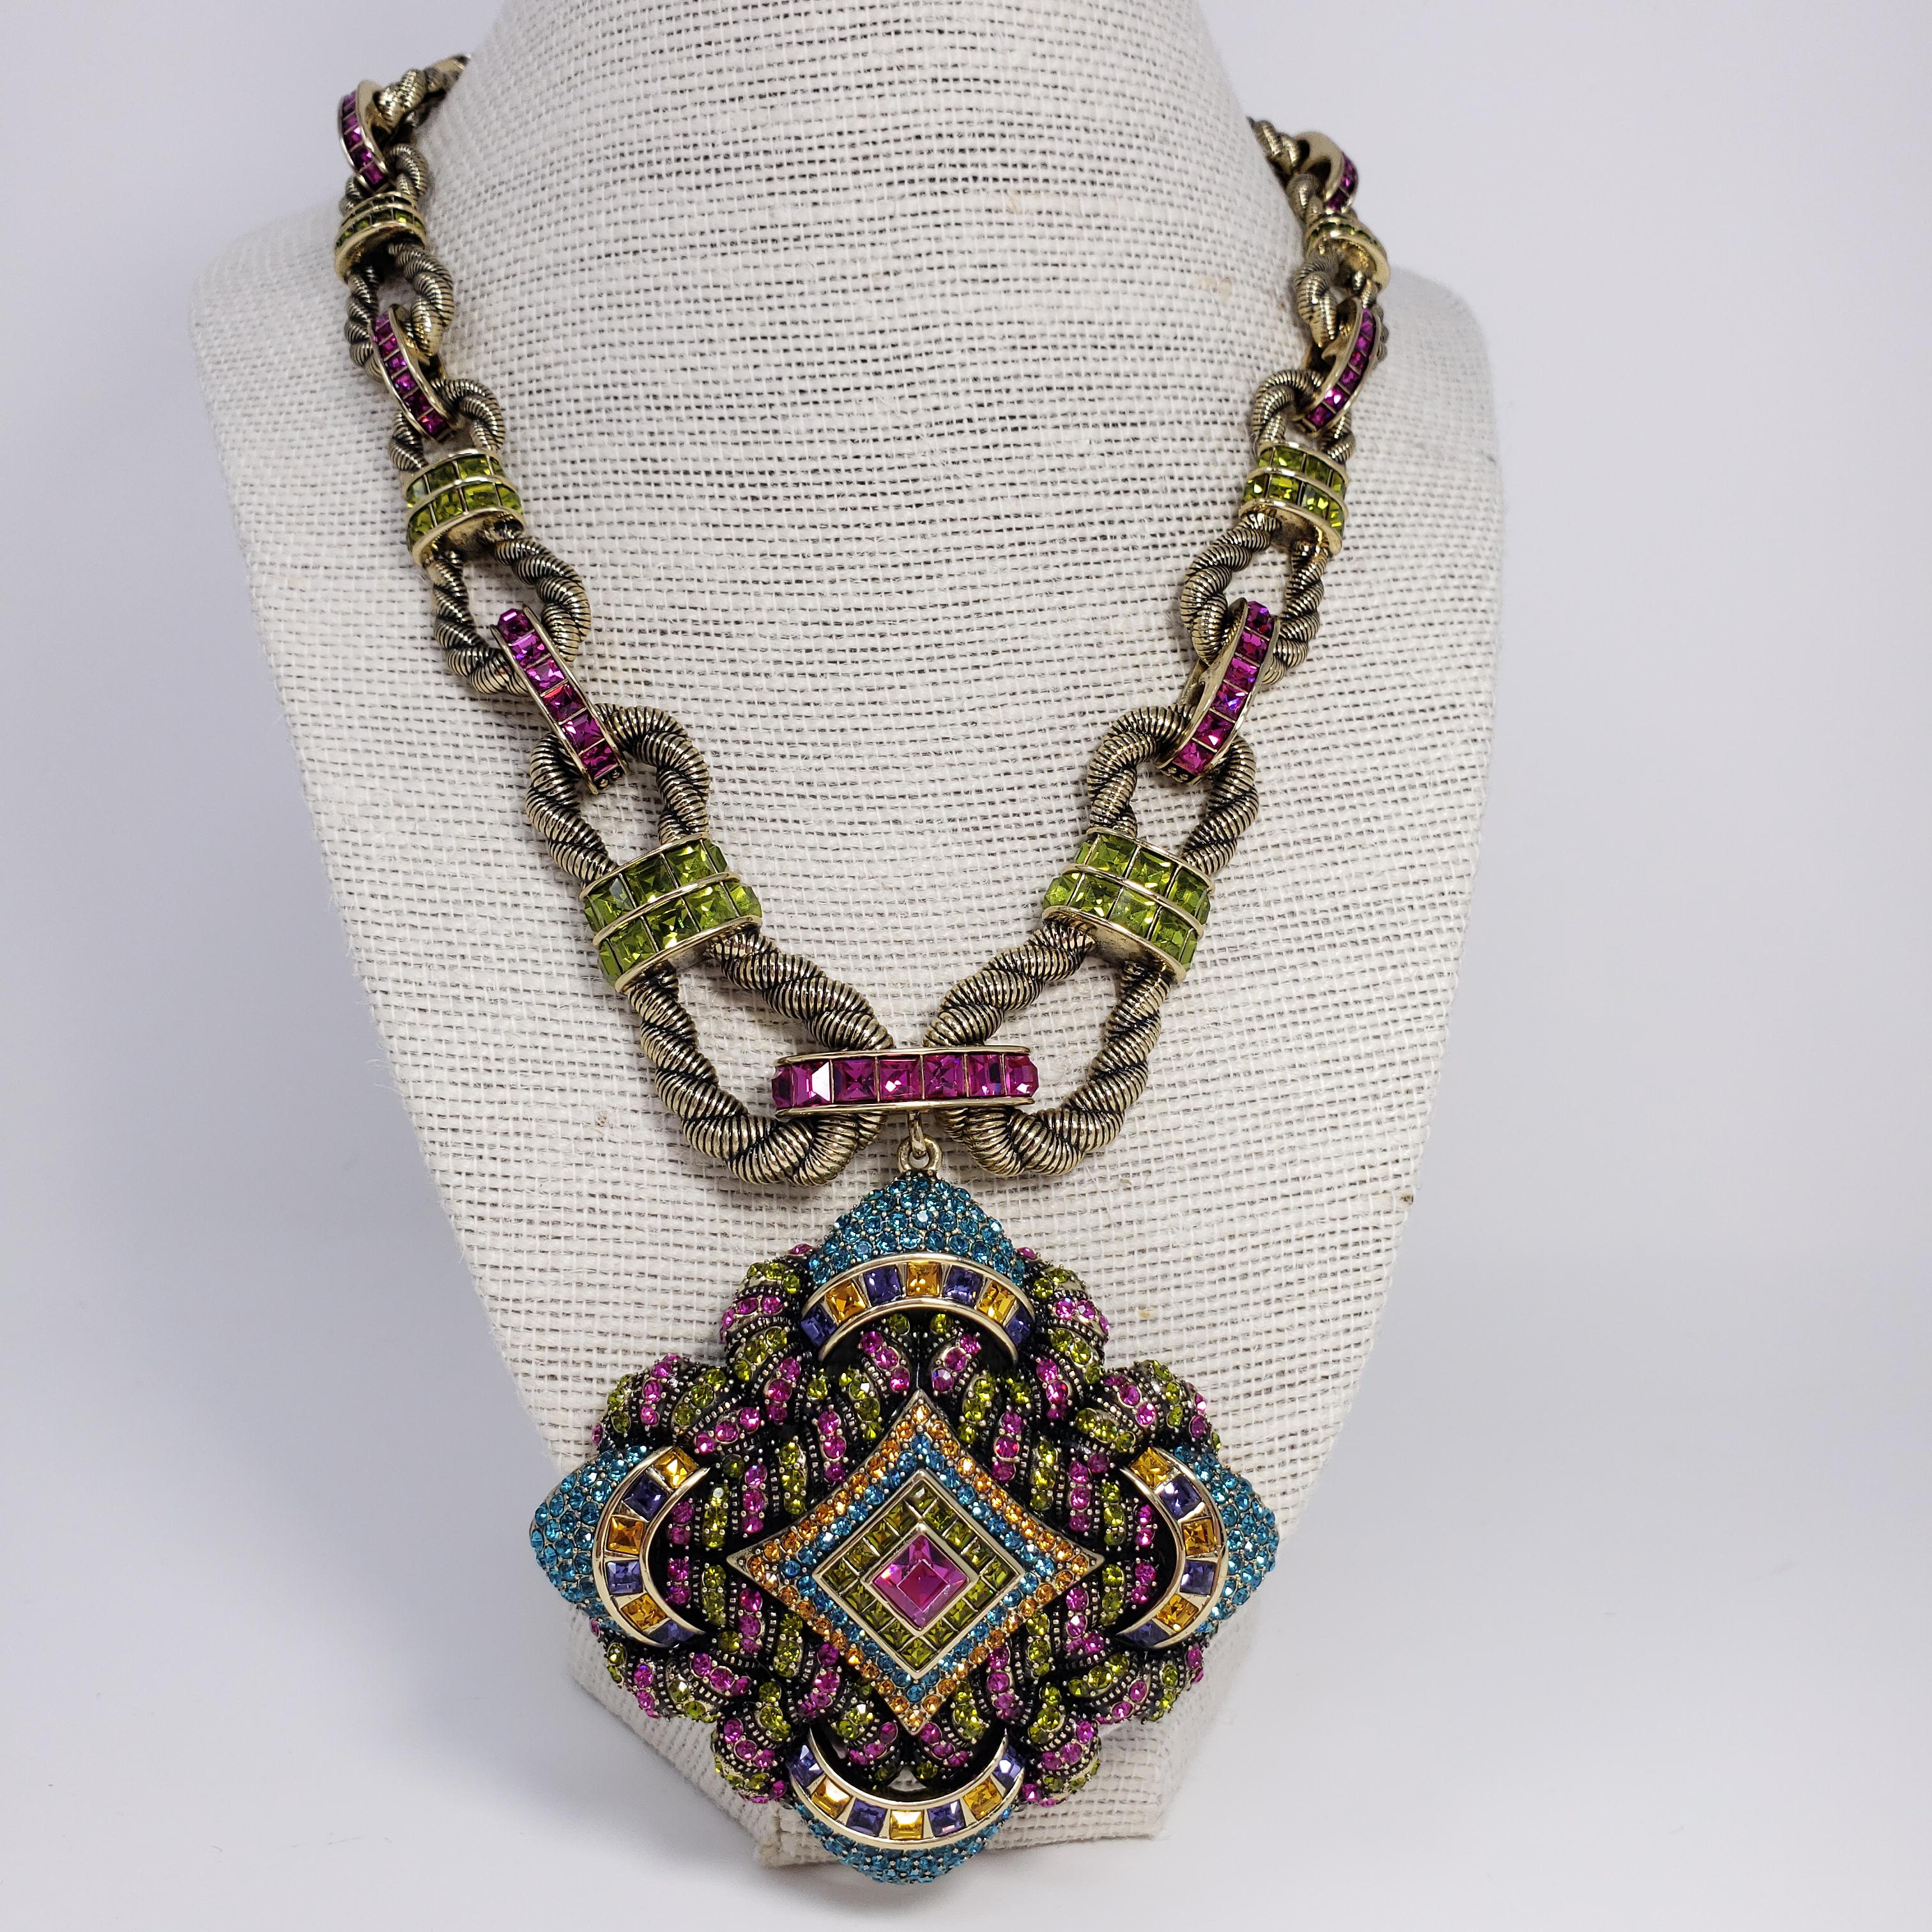 Heidi Daus ornate pendant necklace. Features large decorative pendant adorned with colorful crystals. Rope-motif link necklace.

From Heidi Daus' HSN collection.

Hallmarks: Heidi Daus, China

Pendant Dimensions: 7.5 cm / 3 in by 7.5 cm / 3